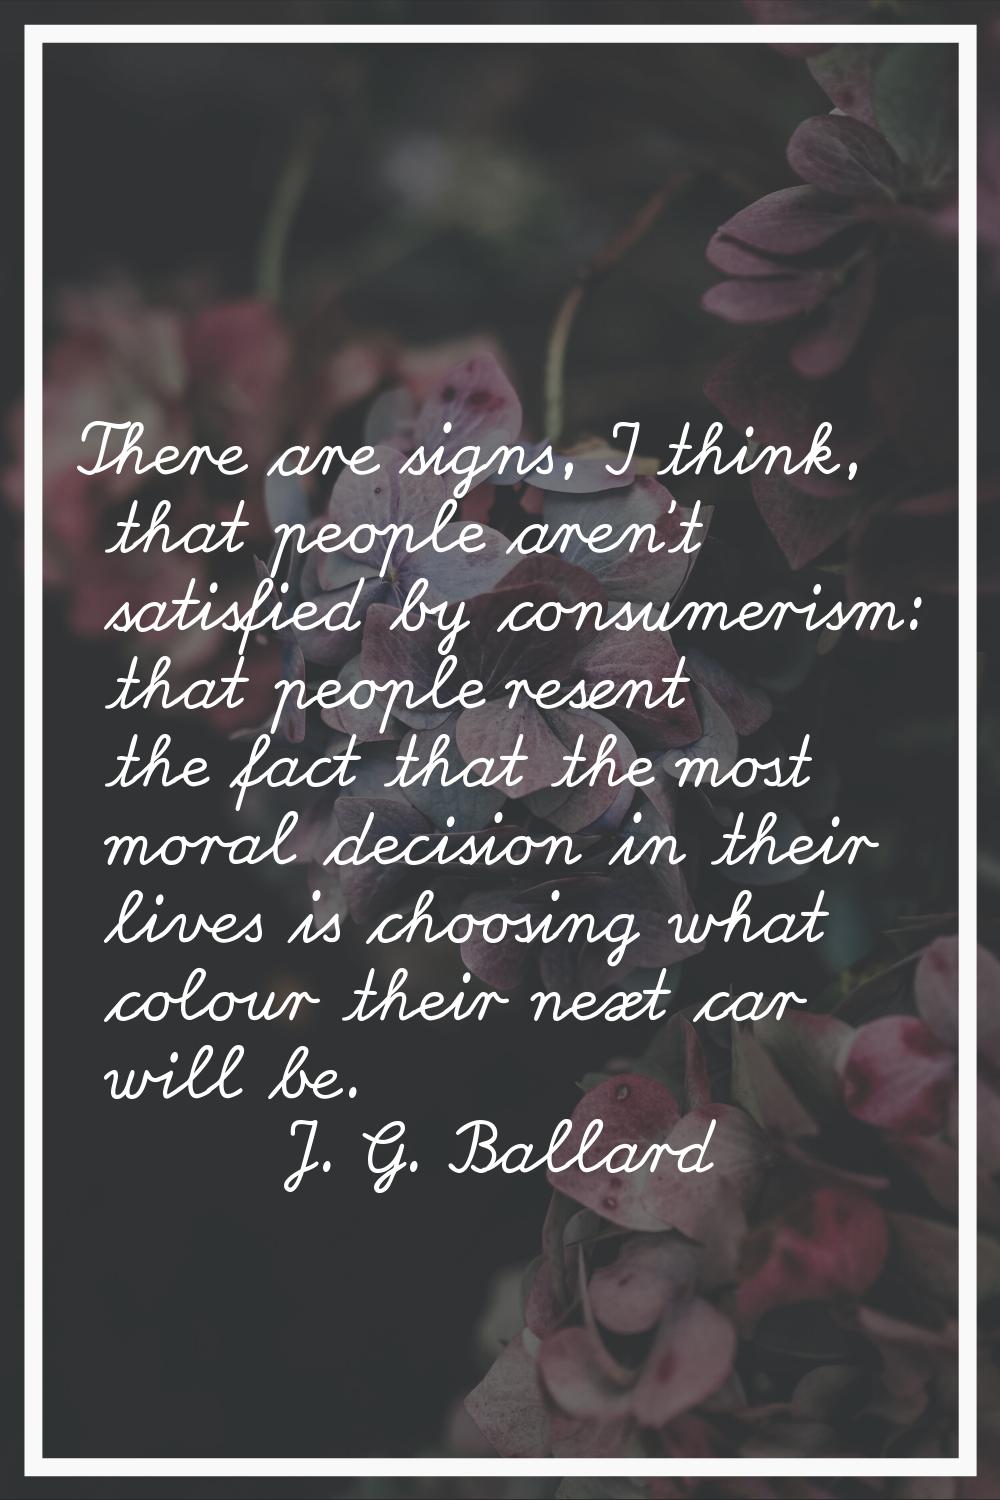 There are signs, I think, that people aren't satisfied by consumerism: that people resent the fact 